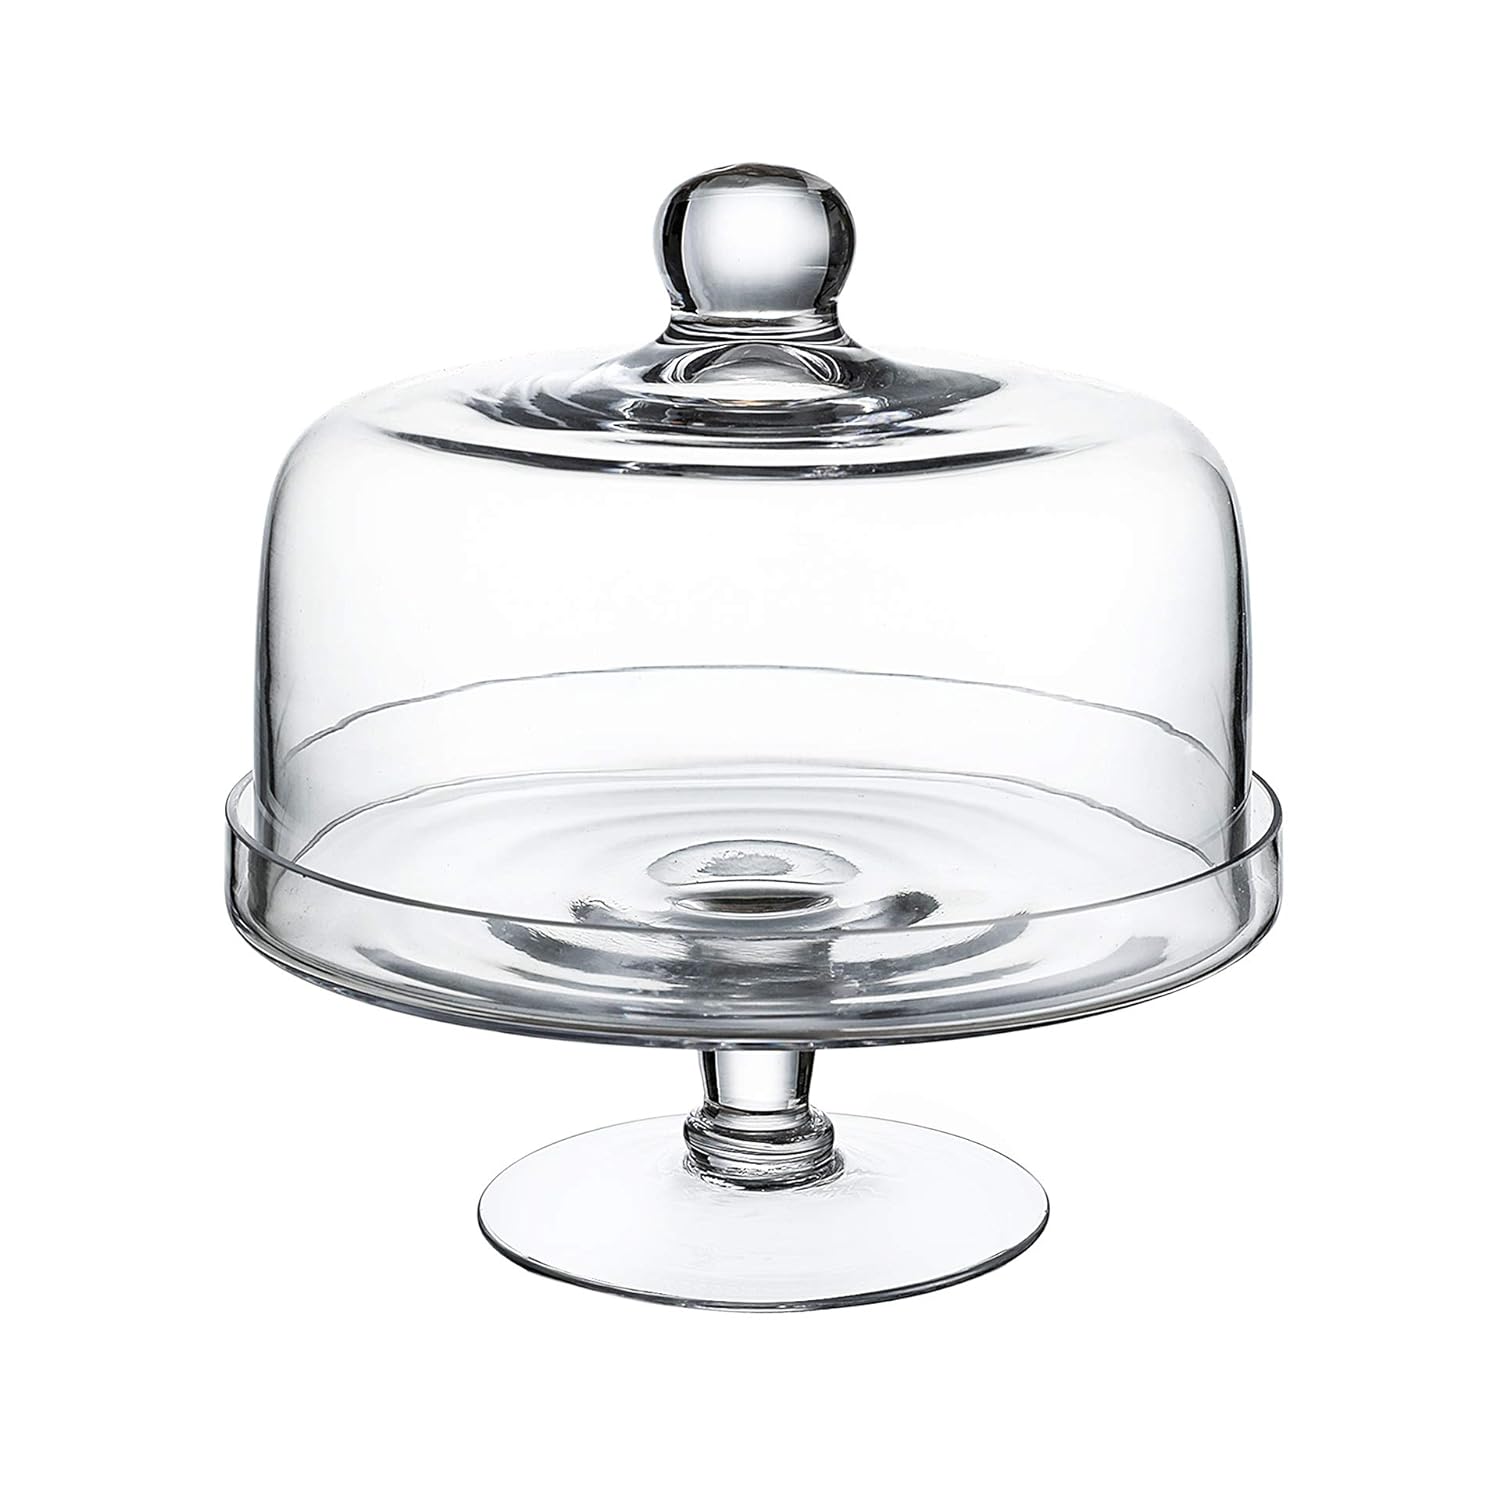 Whole HOUSEWARE Glass Cake Stand with Dome | Cake Holder and Cake Display Stand for Kitchen, Birthday Parties, Weddings